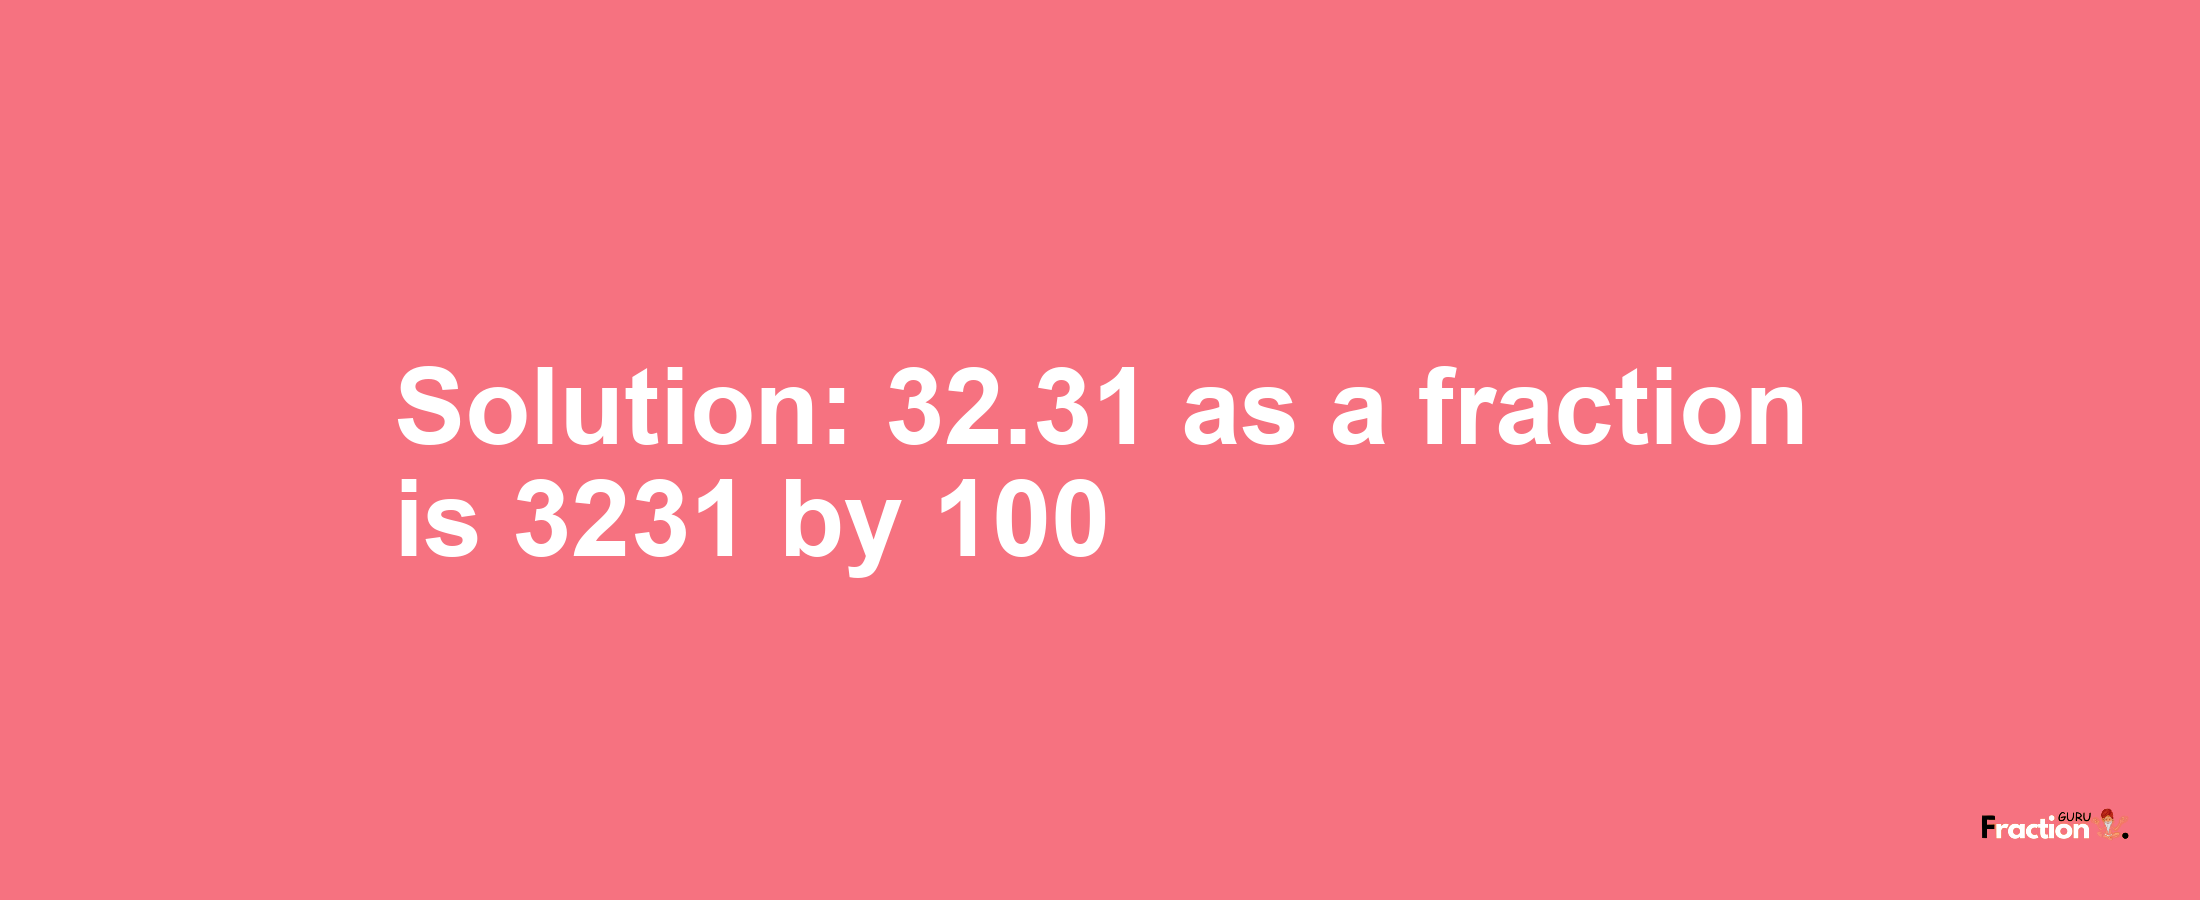 Solution:32.31 as a fraction is 3231/100